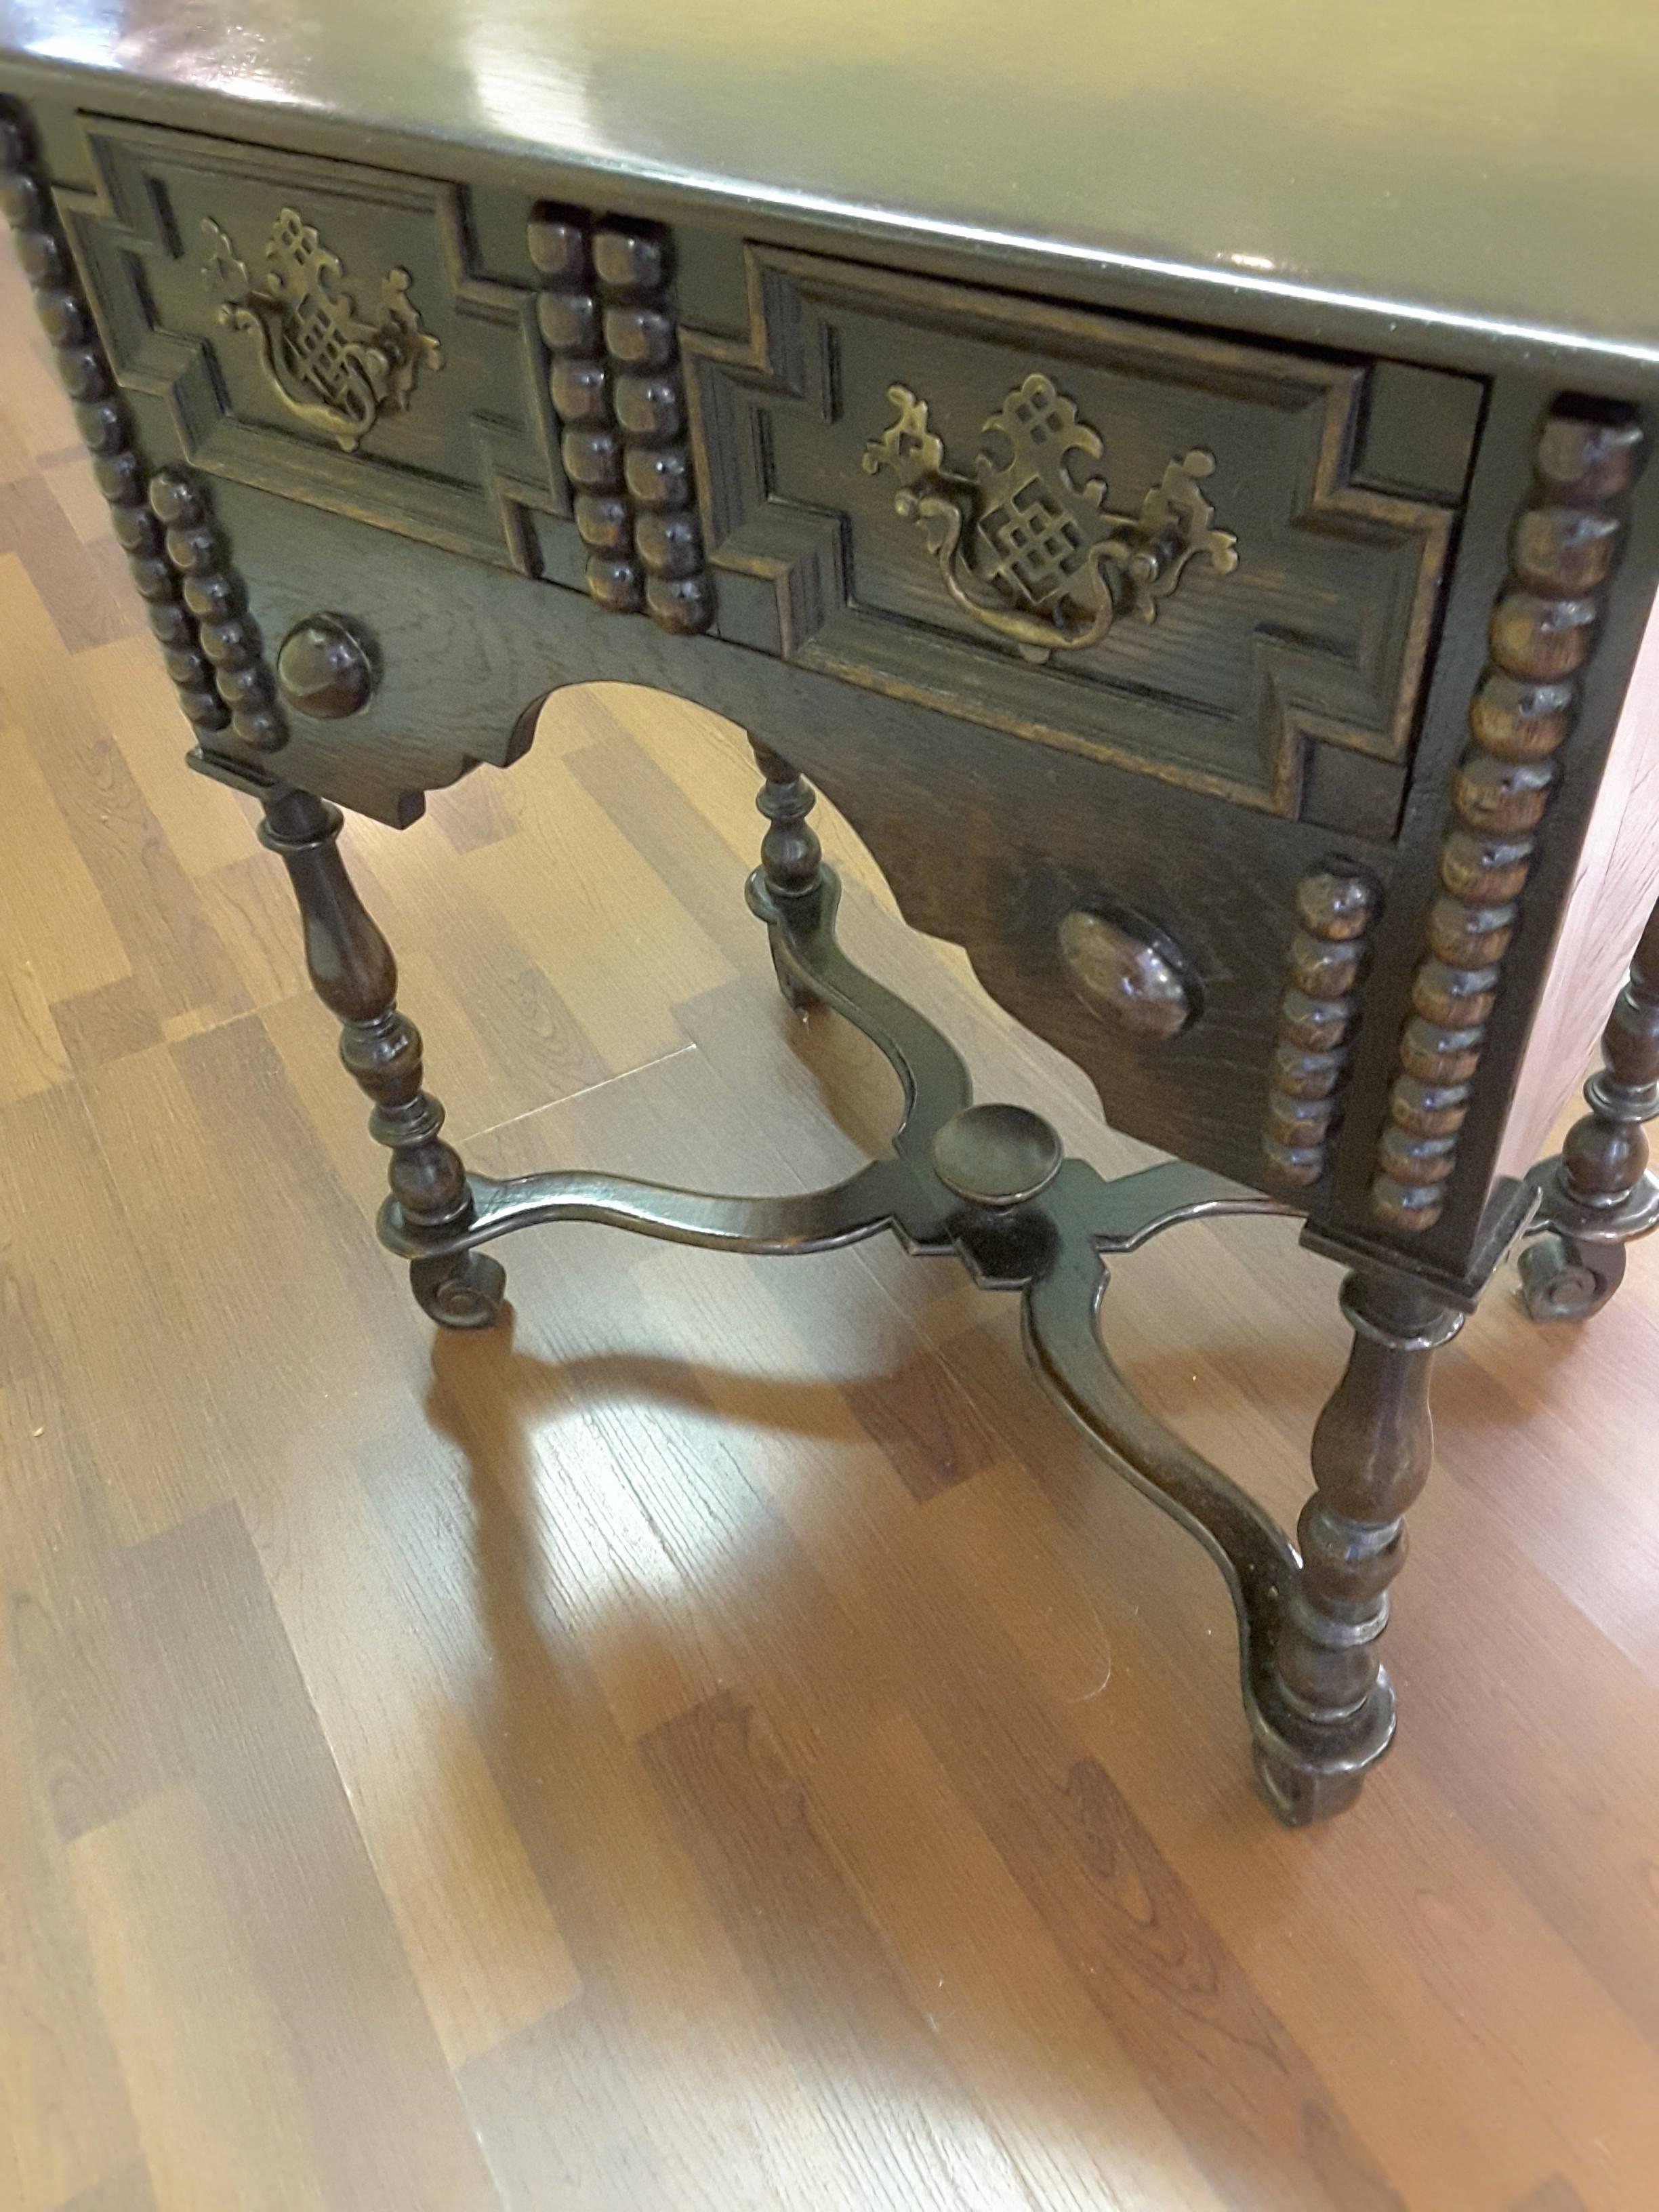 Wylie & Lochhead, Oak server or cabinet, William and Mary Style, late 19th century, an original finish dark oak diminutive server done in highland oak, nice dark patina, original brass hardware, with no issues. The server has a single drawer,